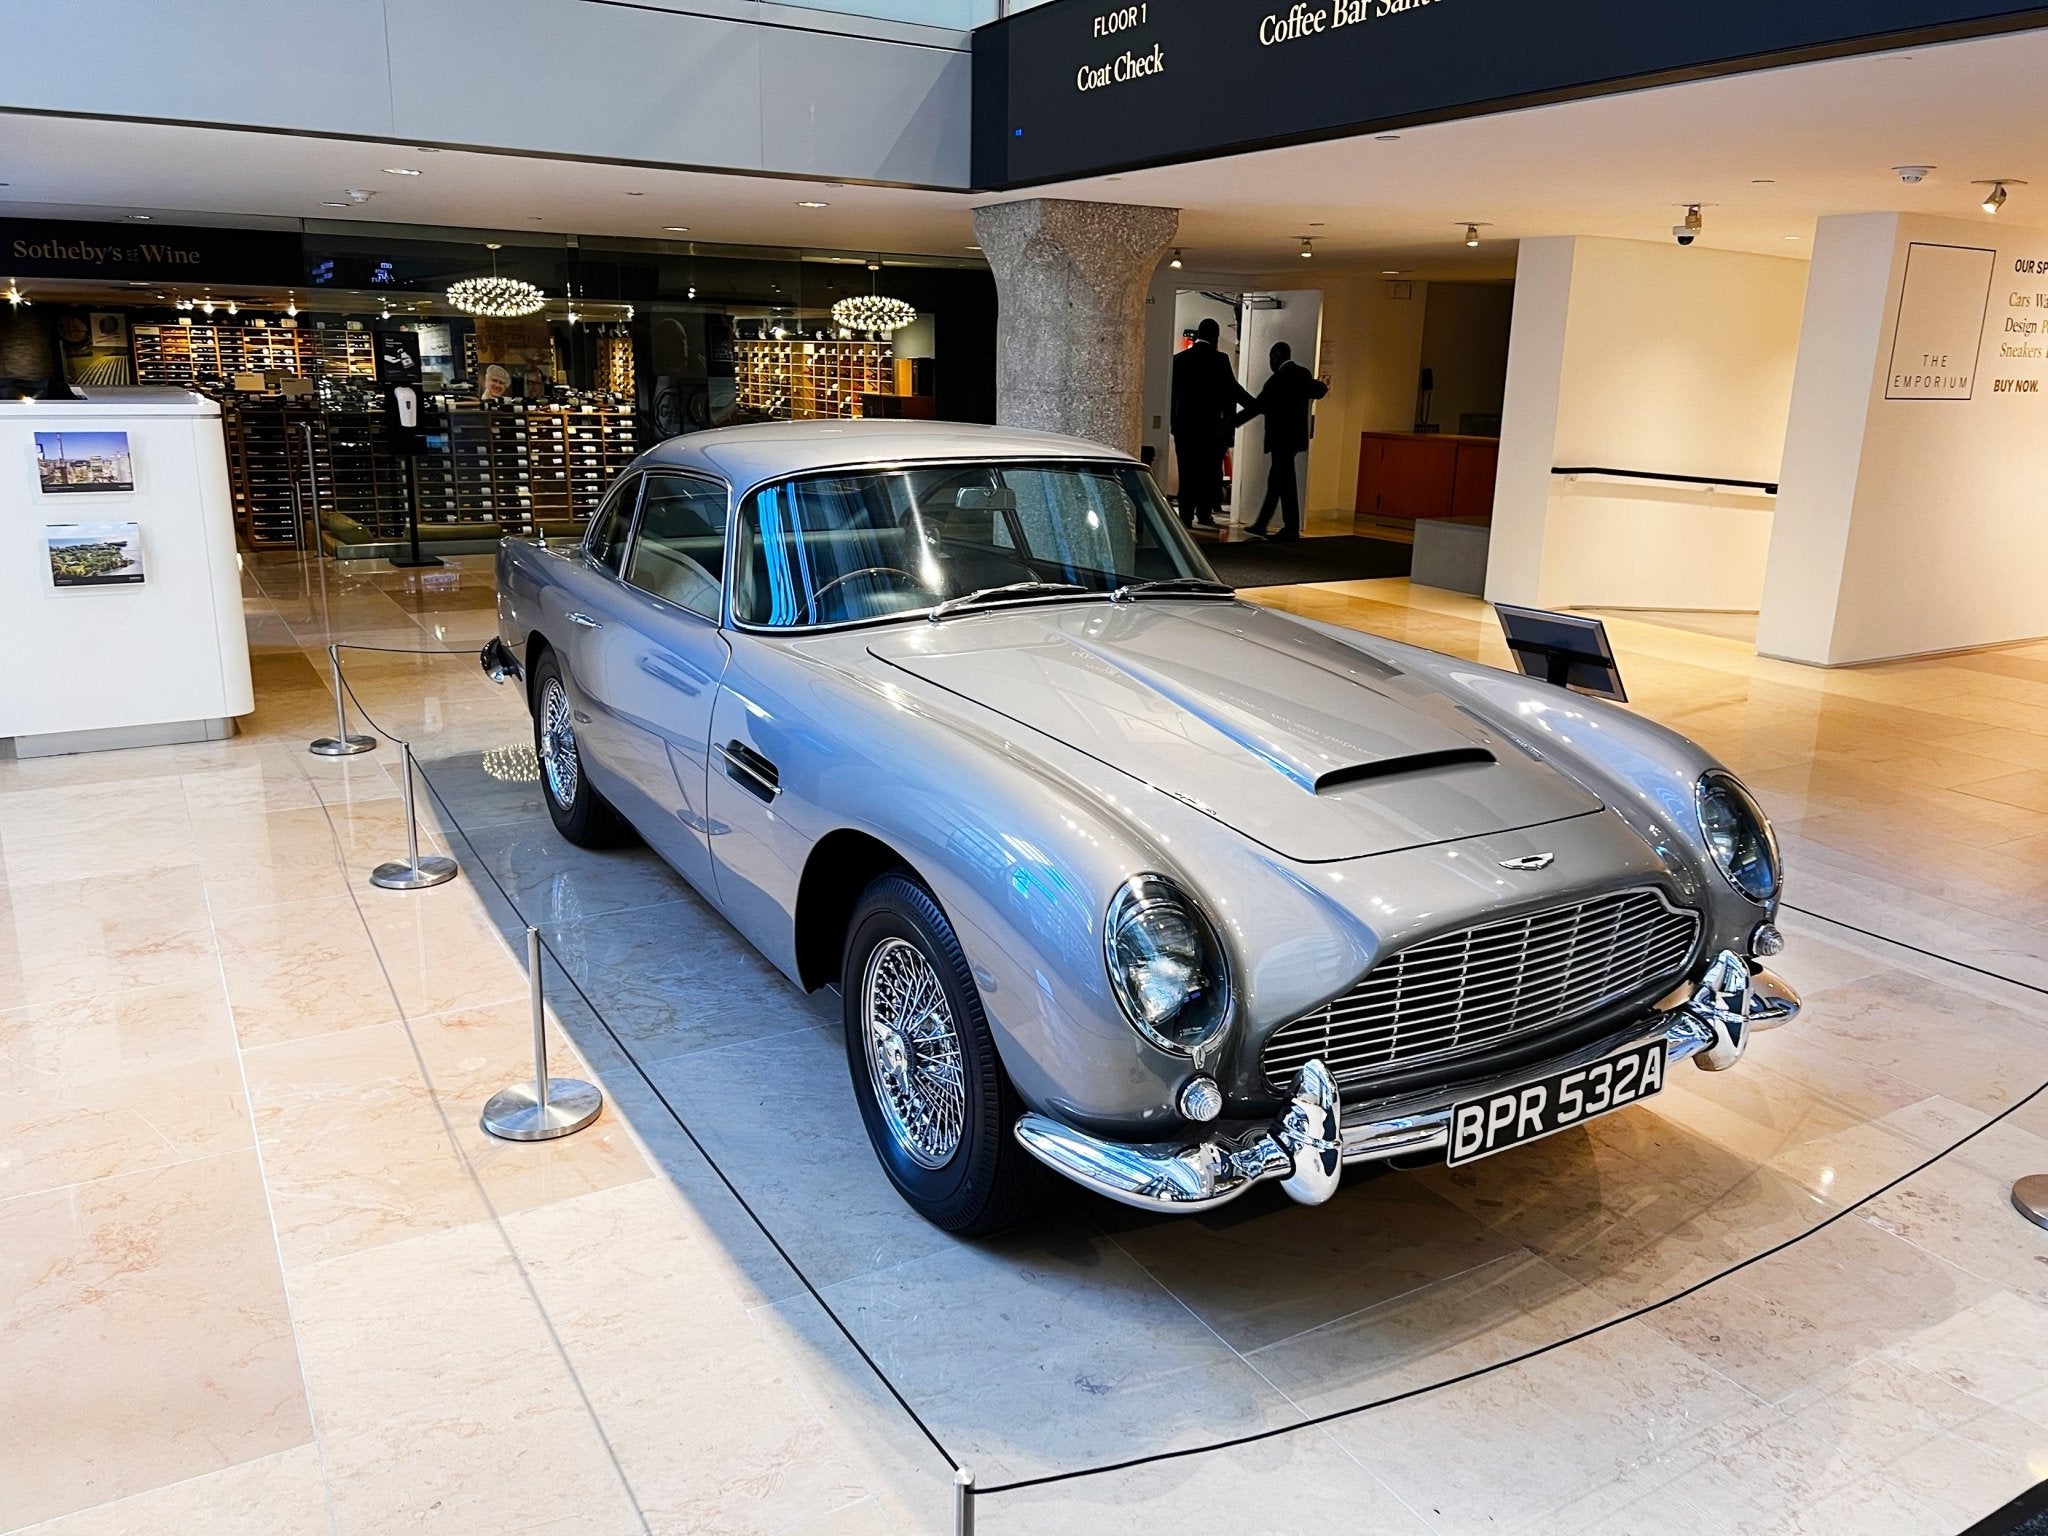 The Most Iconic Aston Martin Model On Sale - DSF Antique Jewelry